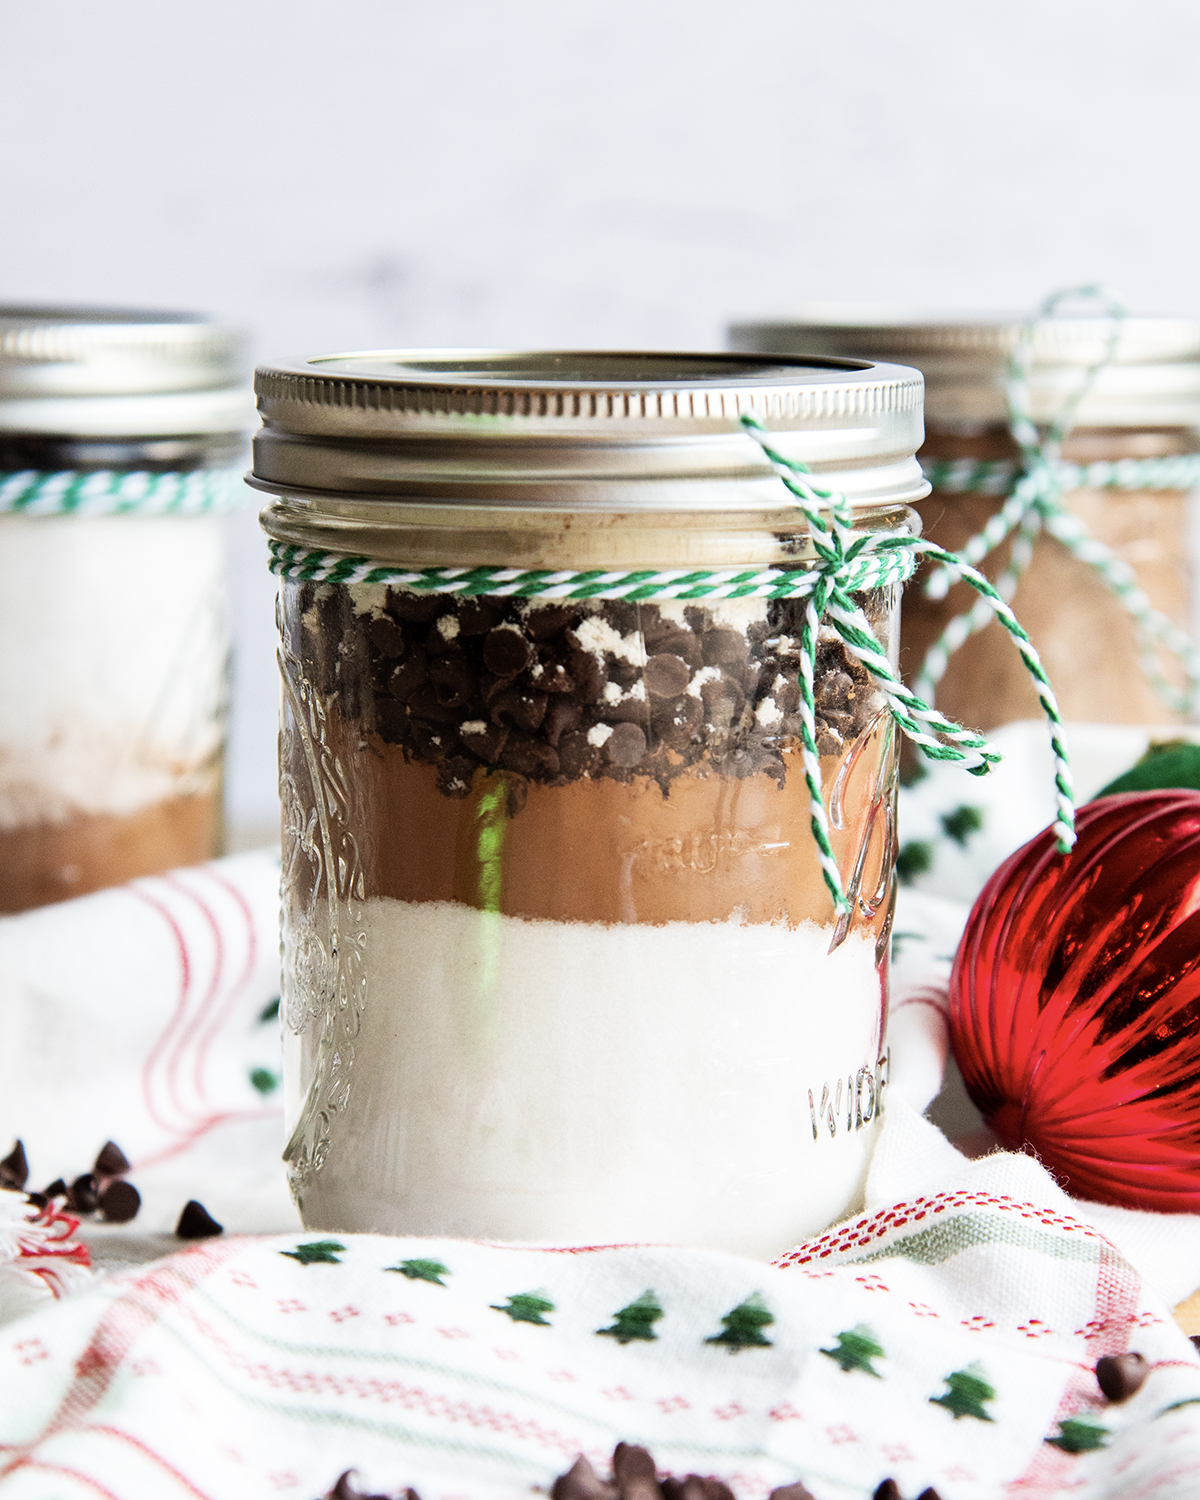 A mason jar full of layered ingredients, with granulated sugar, cocoa powder, and chocolate chips.